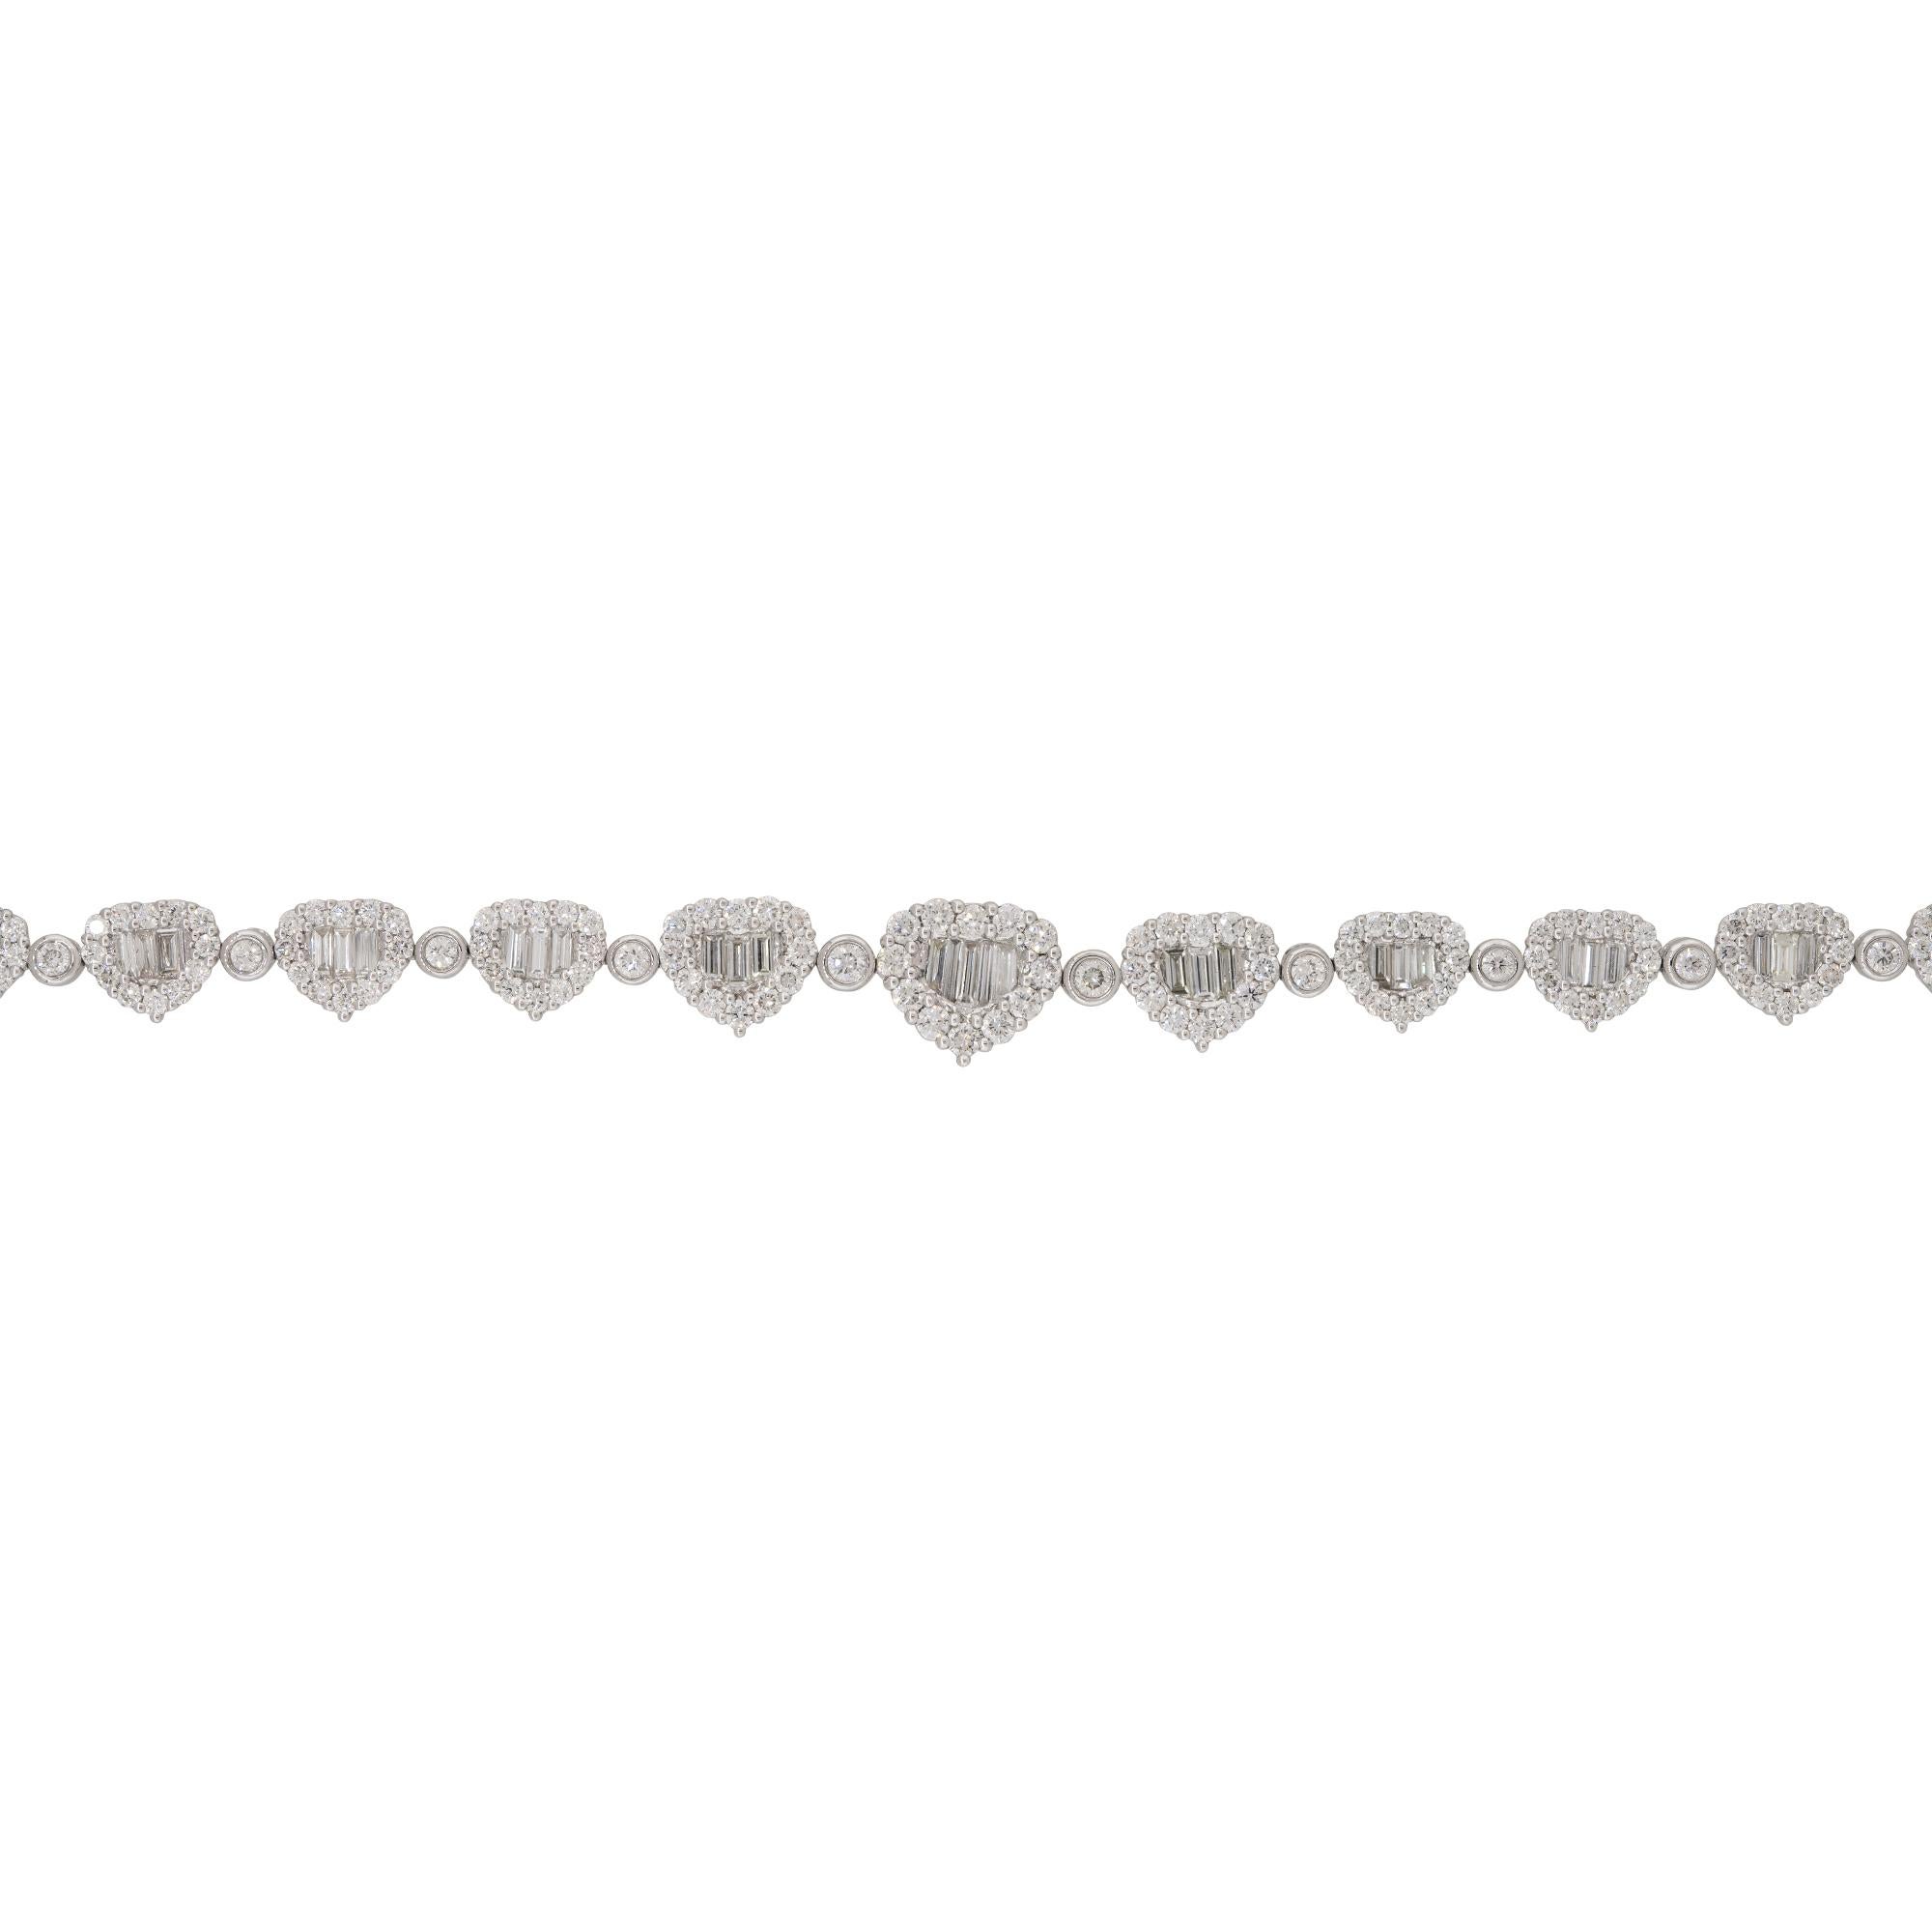 18k White Gold 6.27ctw Pave Diamond Heart Shaped Station Bracelet

Product: Pave Diamond Heart Shaped Station Bracelet
Material: 18 Karat White Gold
Diamond Details: There are approximately 2.19 carats of Baguette cut  diamonds (41 stones) and